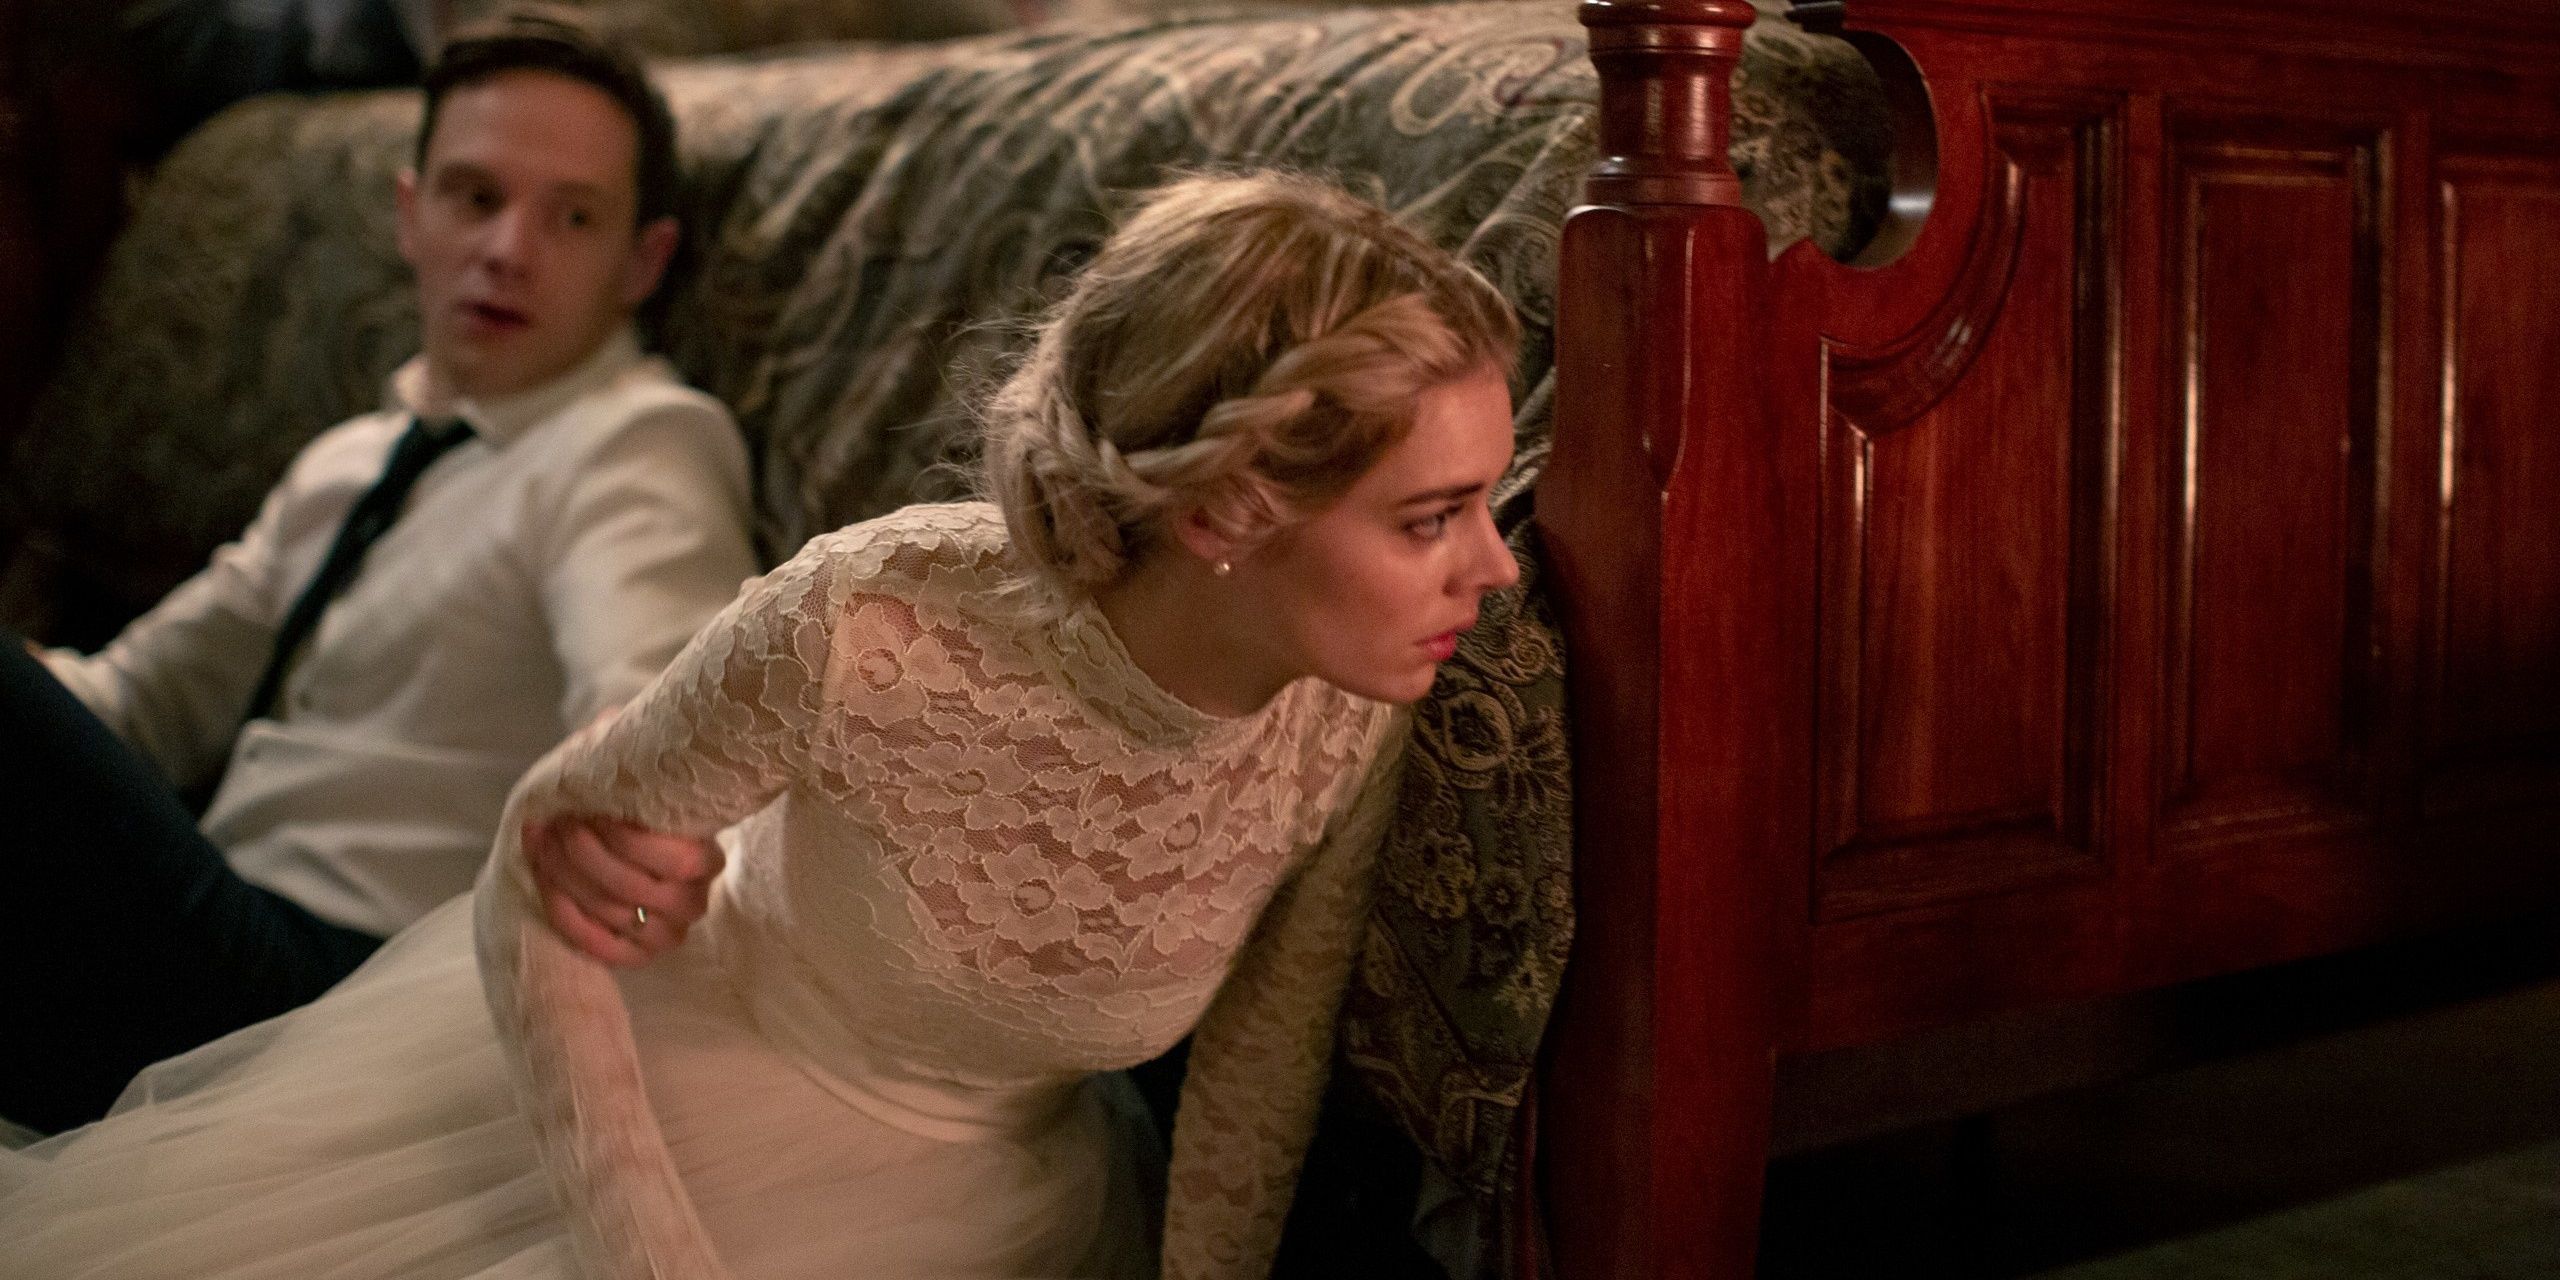 Grace hiding behind a bed with a man beside her grabbing her arm as she looks out for the killer